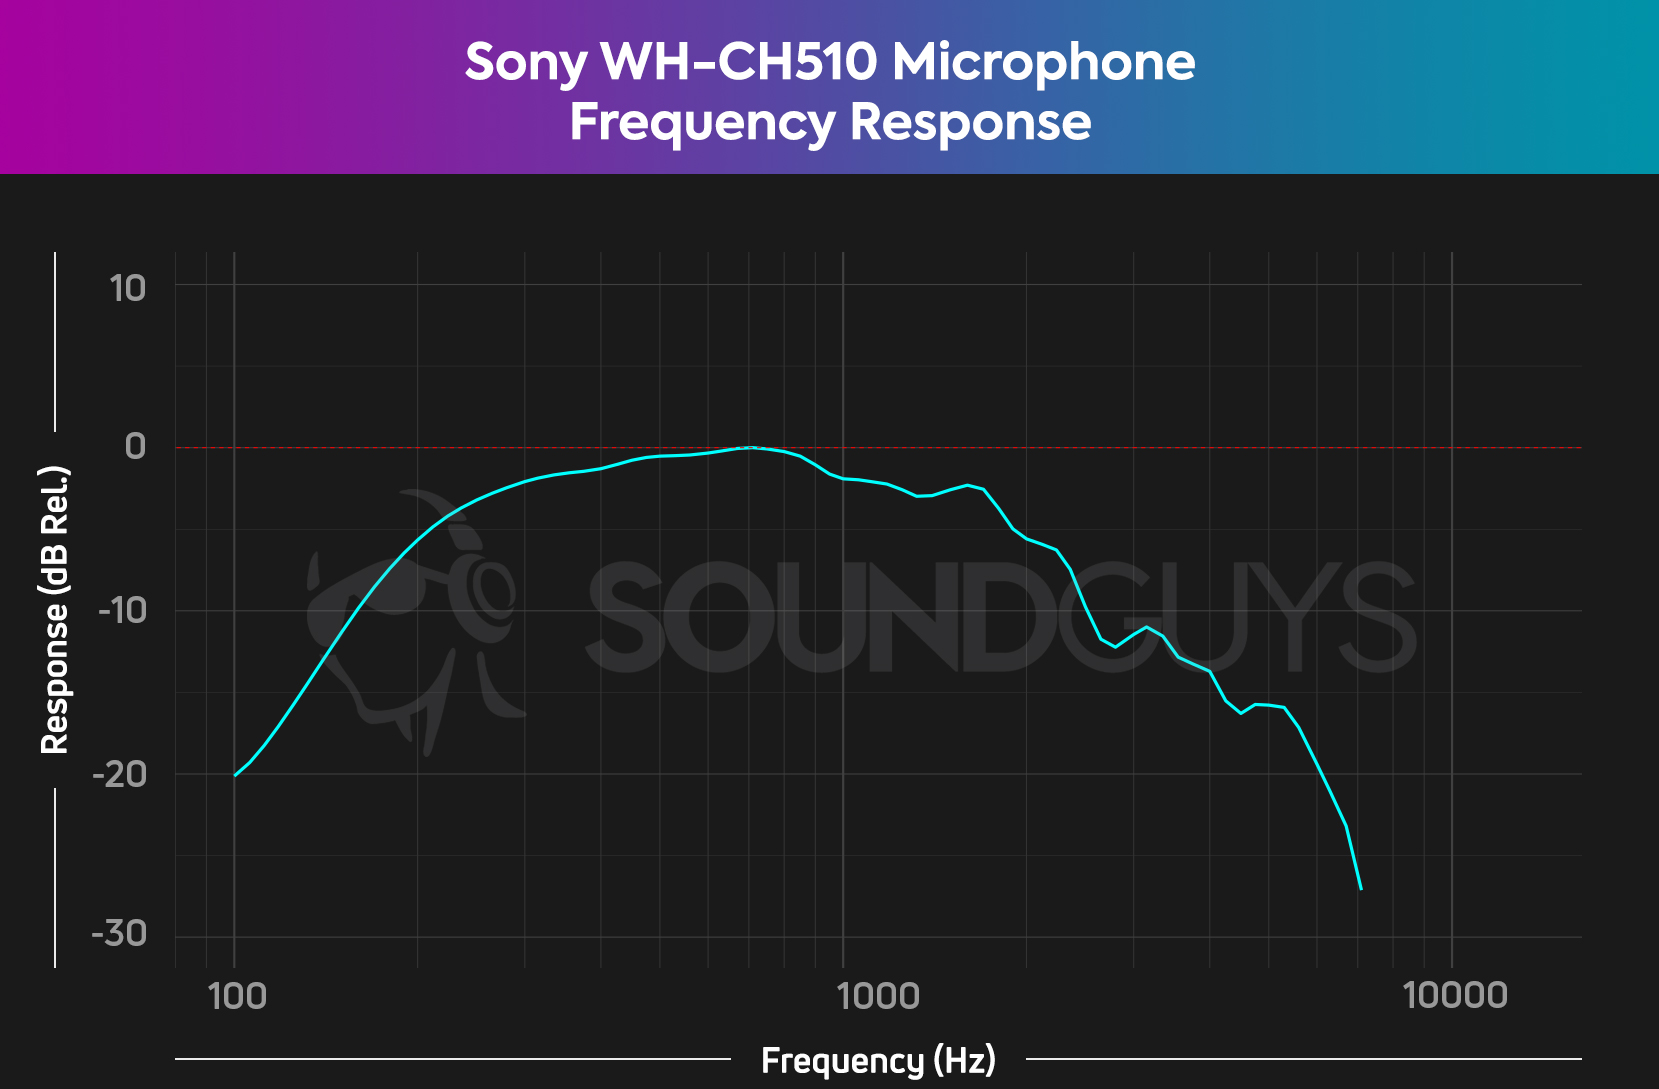 The microphone of the Sony WH-CH510 performs well enough, but what a chart can't show is the poor noise rejection.